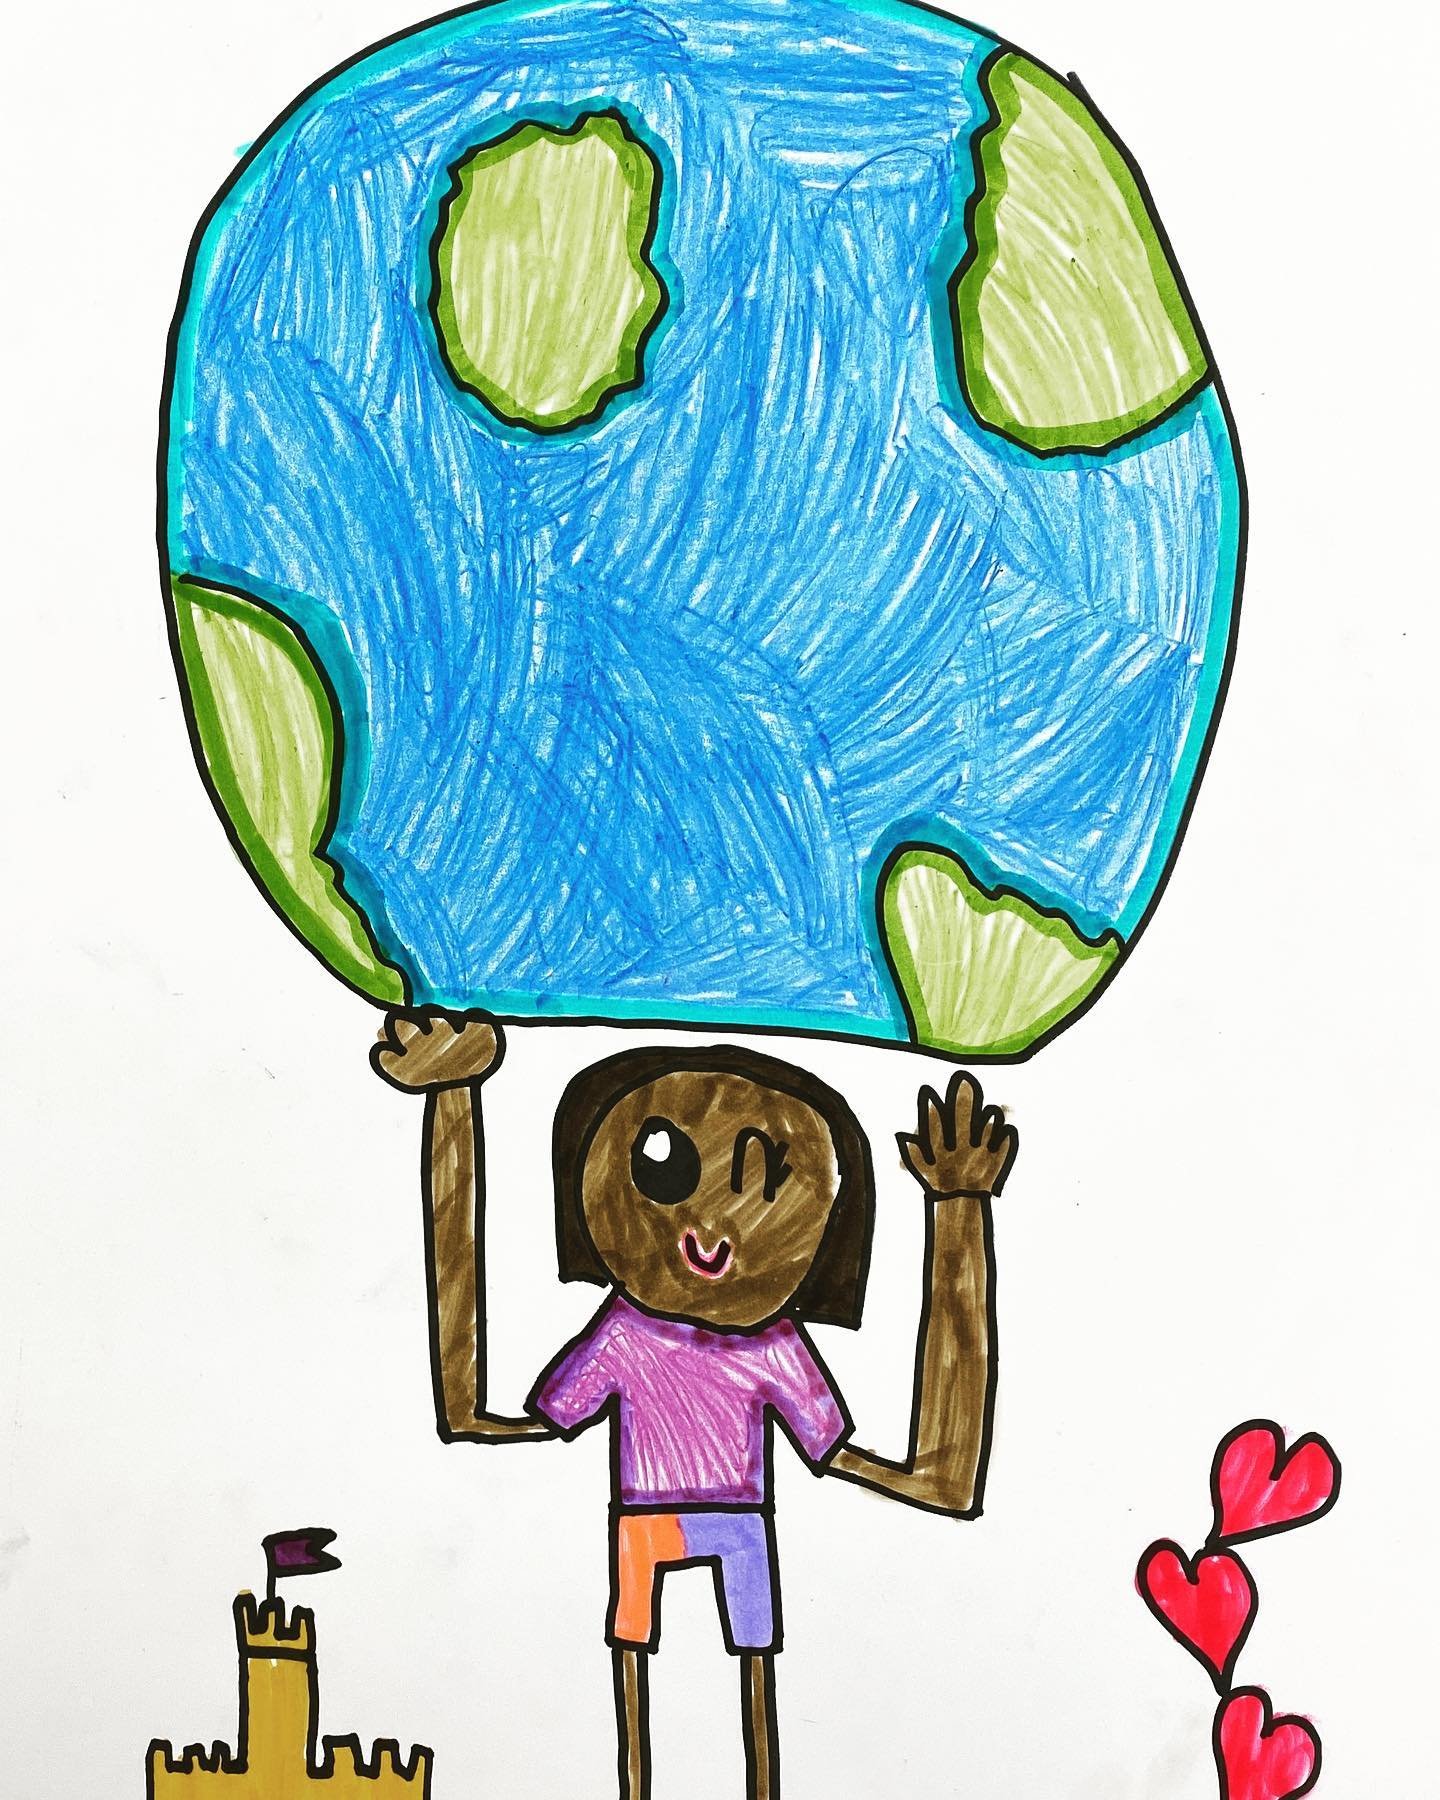 &ldquo;The Earth is&hellip; a ball,&rdquo; drawing by a first grader